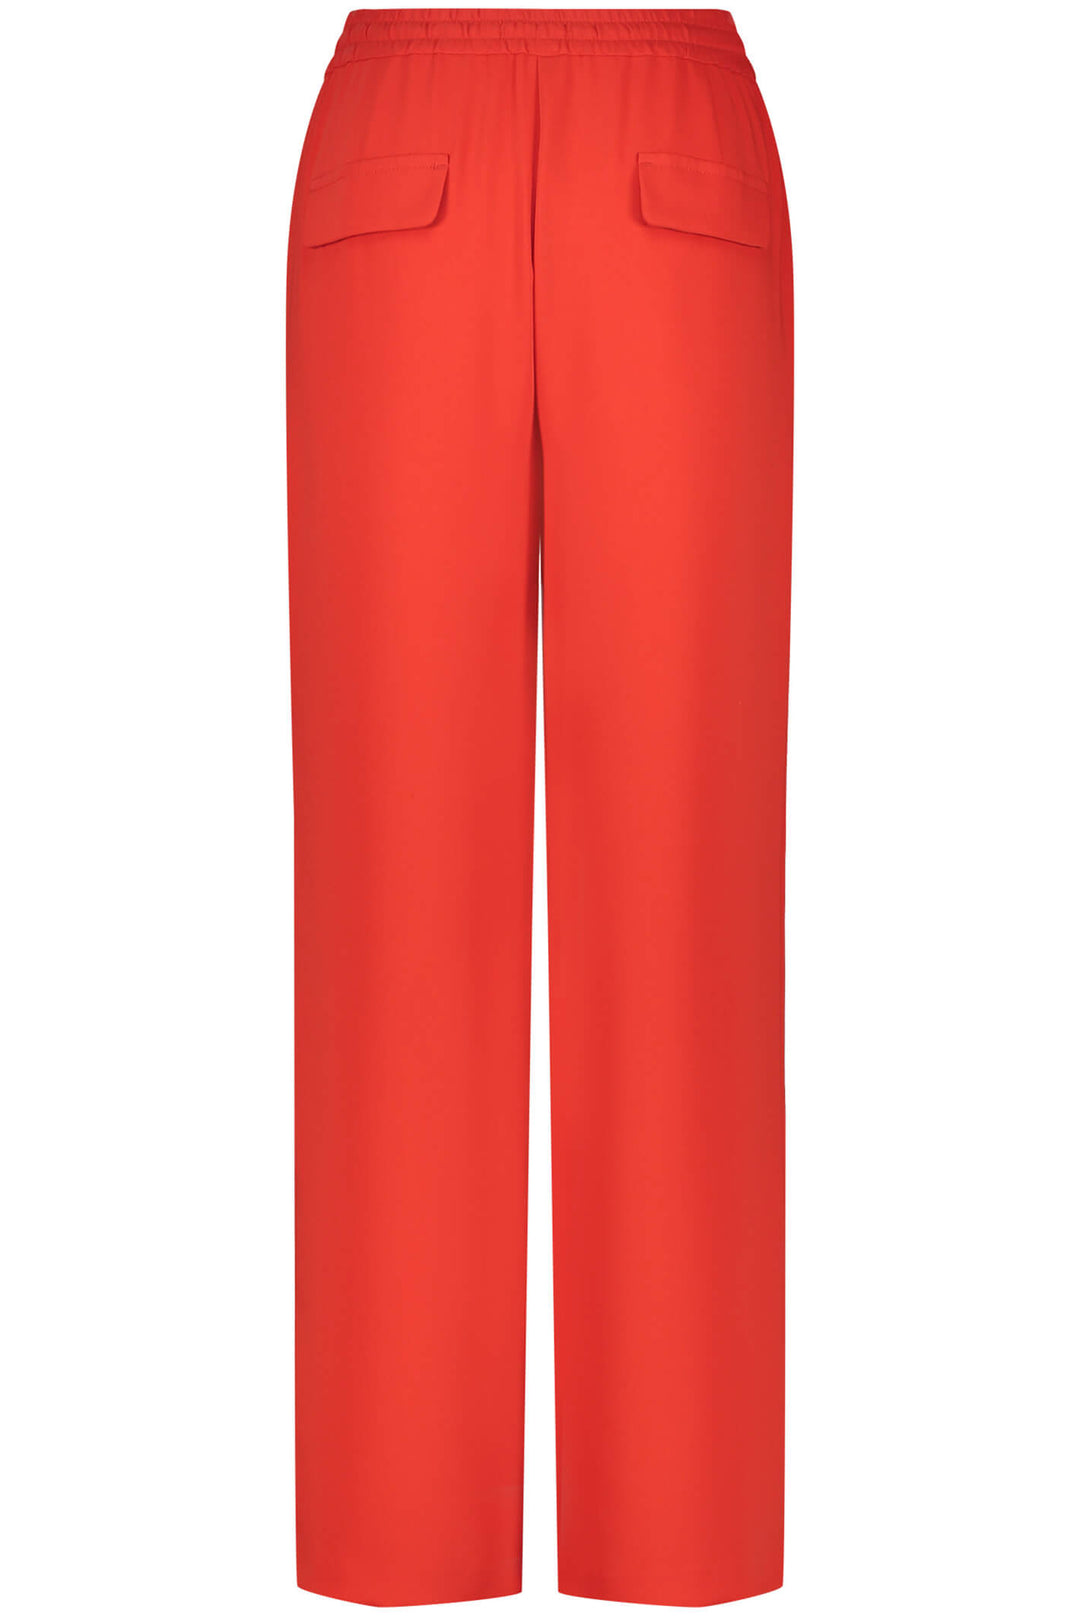 Gerry Weber 120015 Fire Red Trousers - Experience Boutique